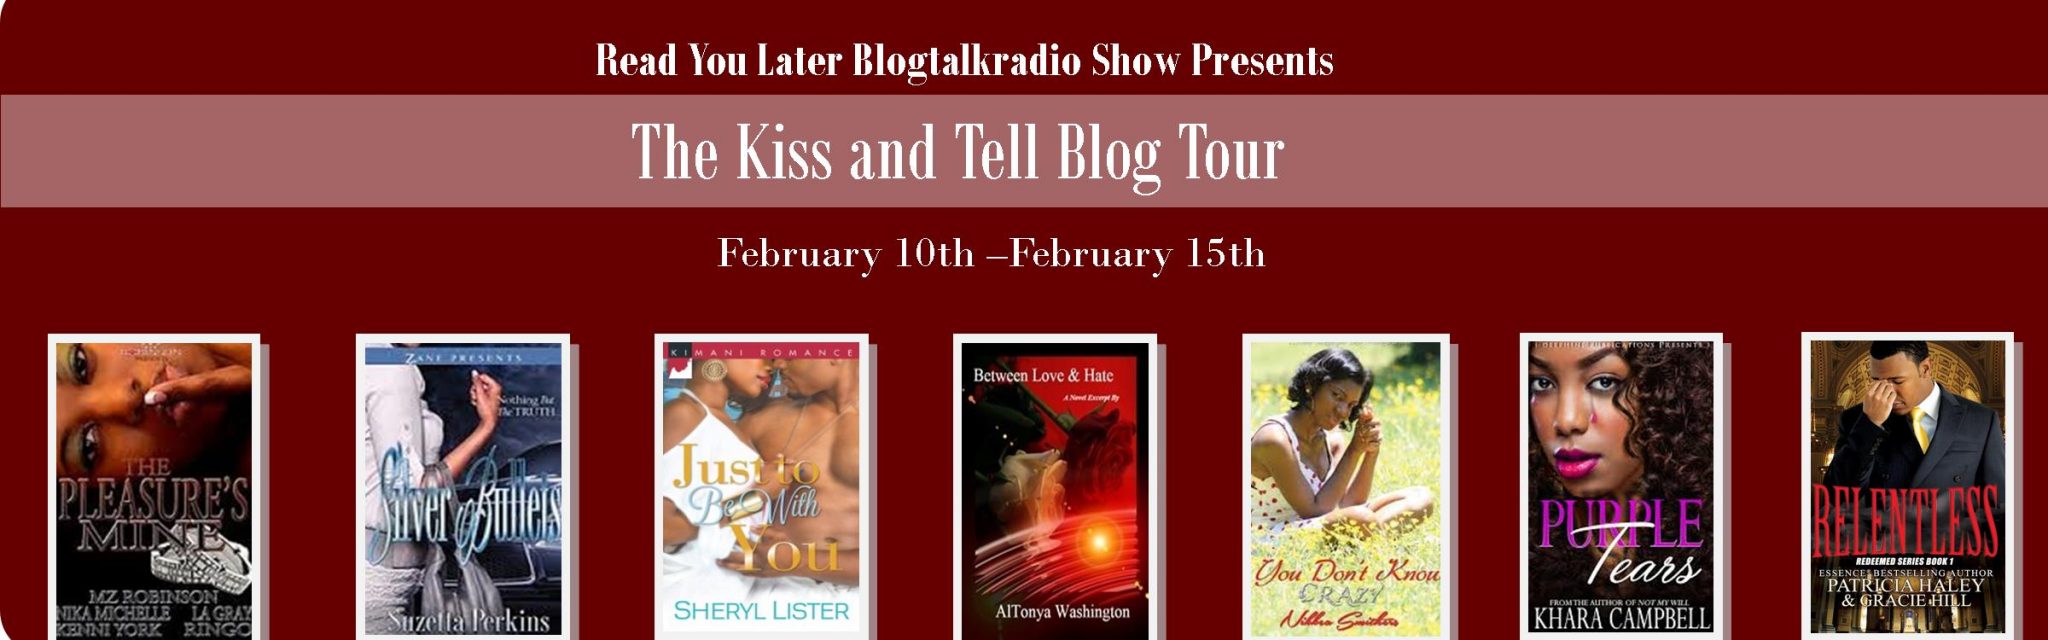 The Kiss and Tell Blog Tour